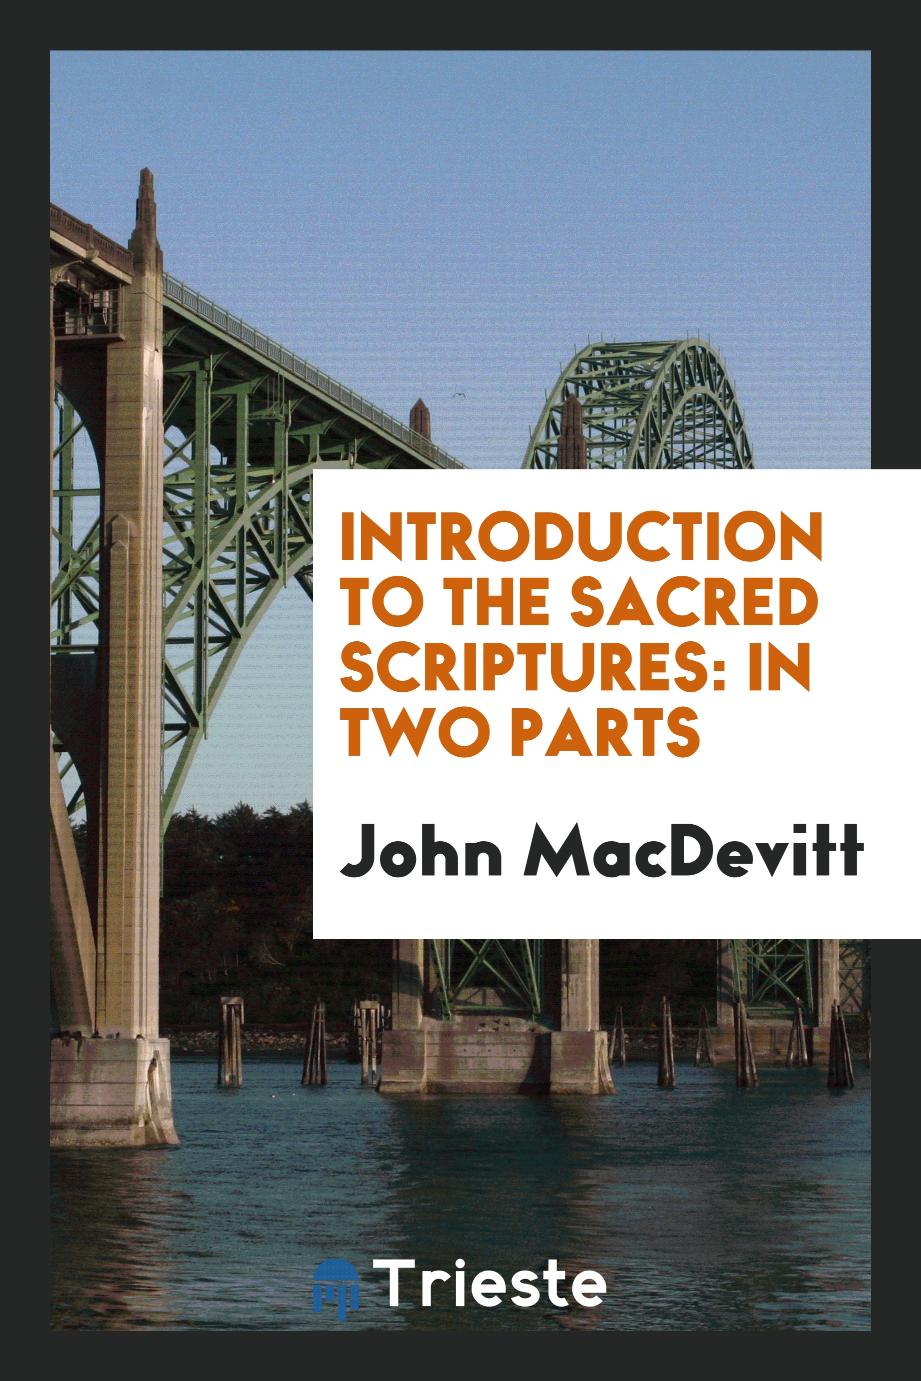 Introduction to the sacred scriptures: in two parts